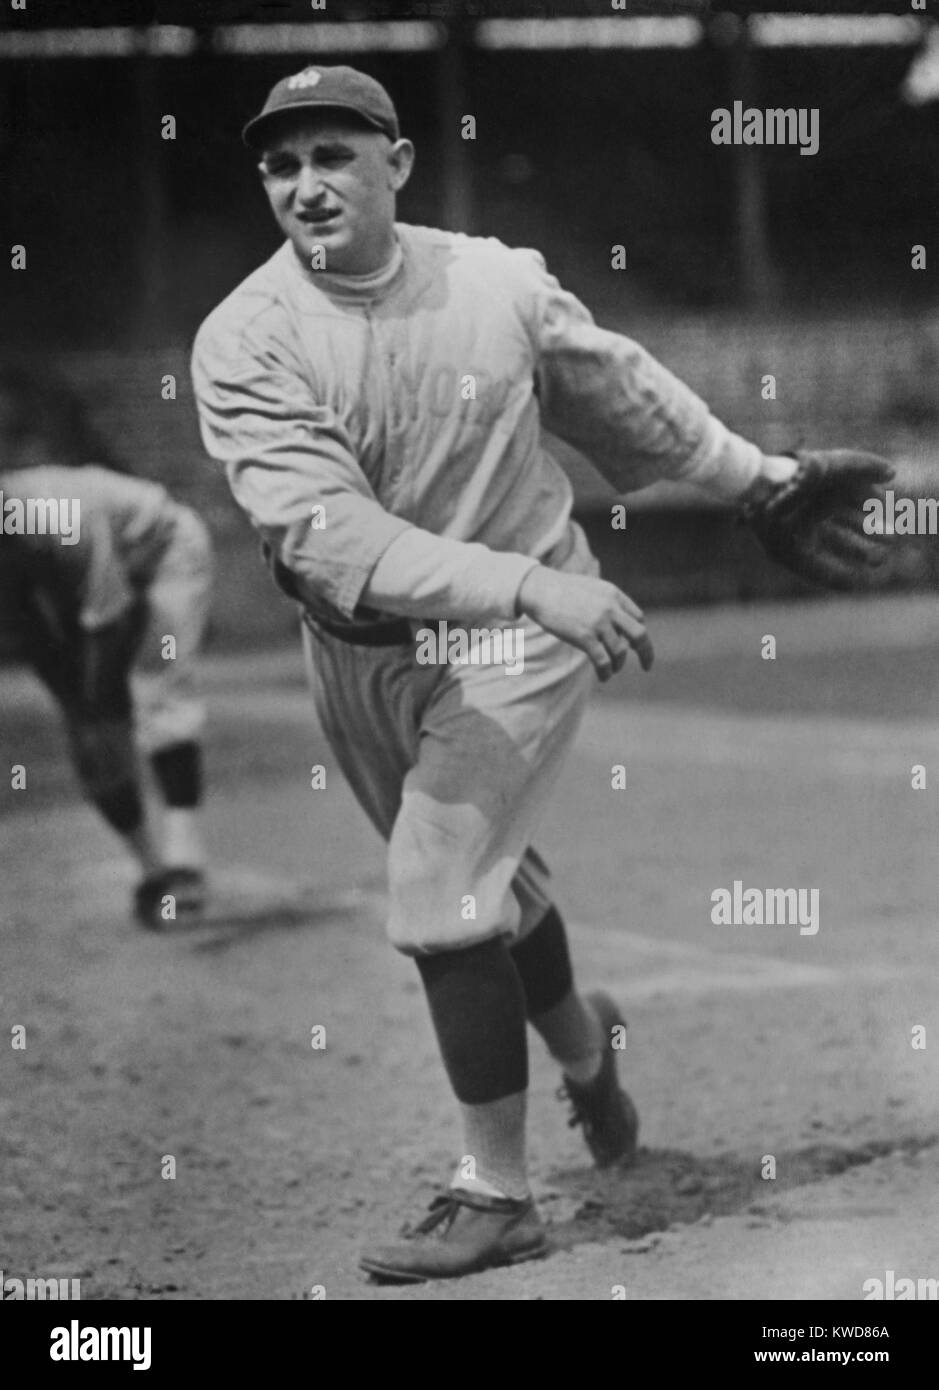 New York Yankees pitcher Carl Mays on the mound in 1922. In 1920, he threw a 'submarine' pitch that beaned and killed Cleveland Indians' Ray Chapman. It was the first fatal player injury during a major league baseball game. (BSLOC 2015 17 12) Stock Photo